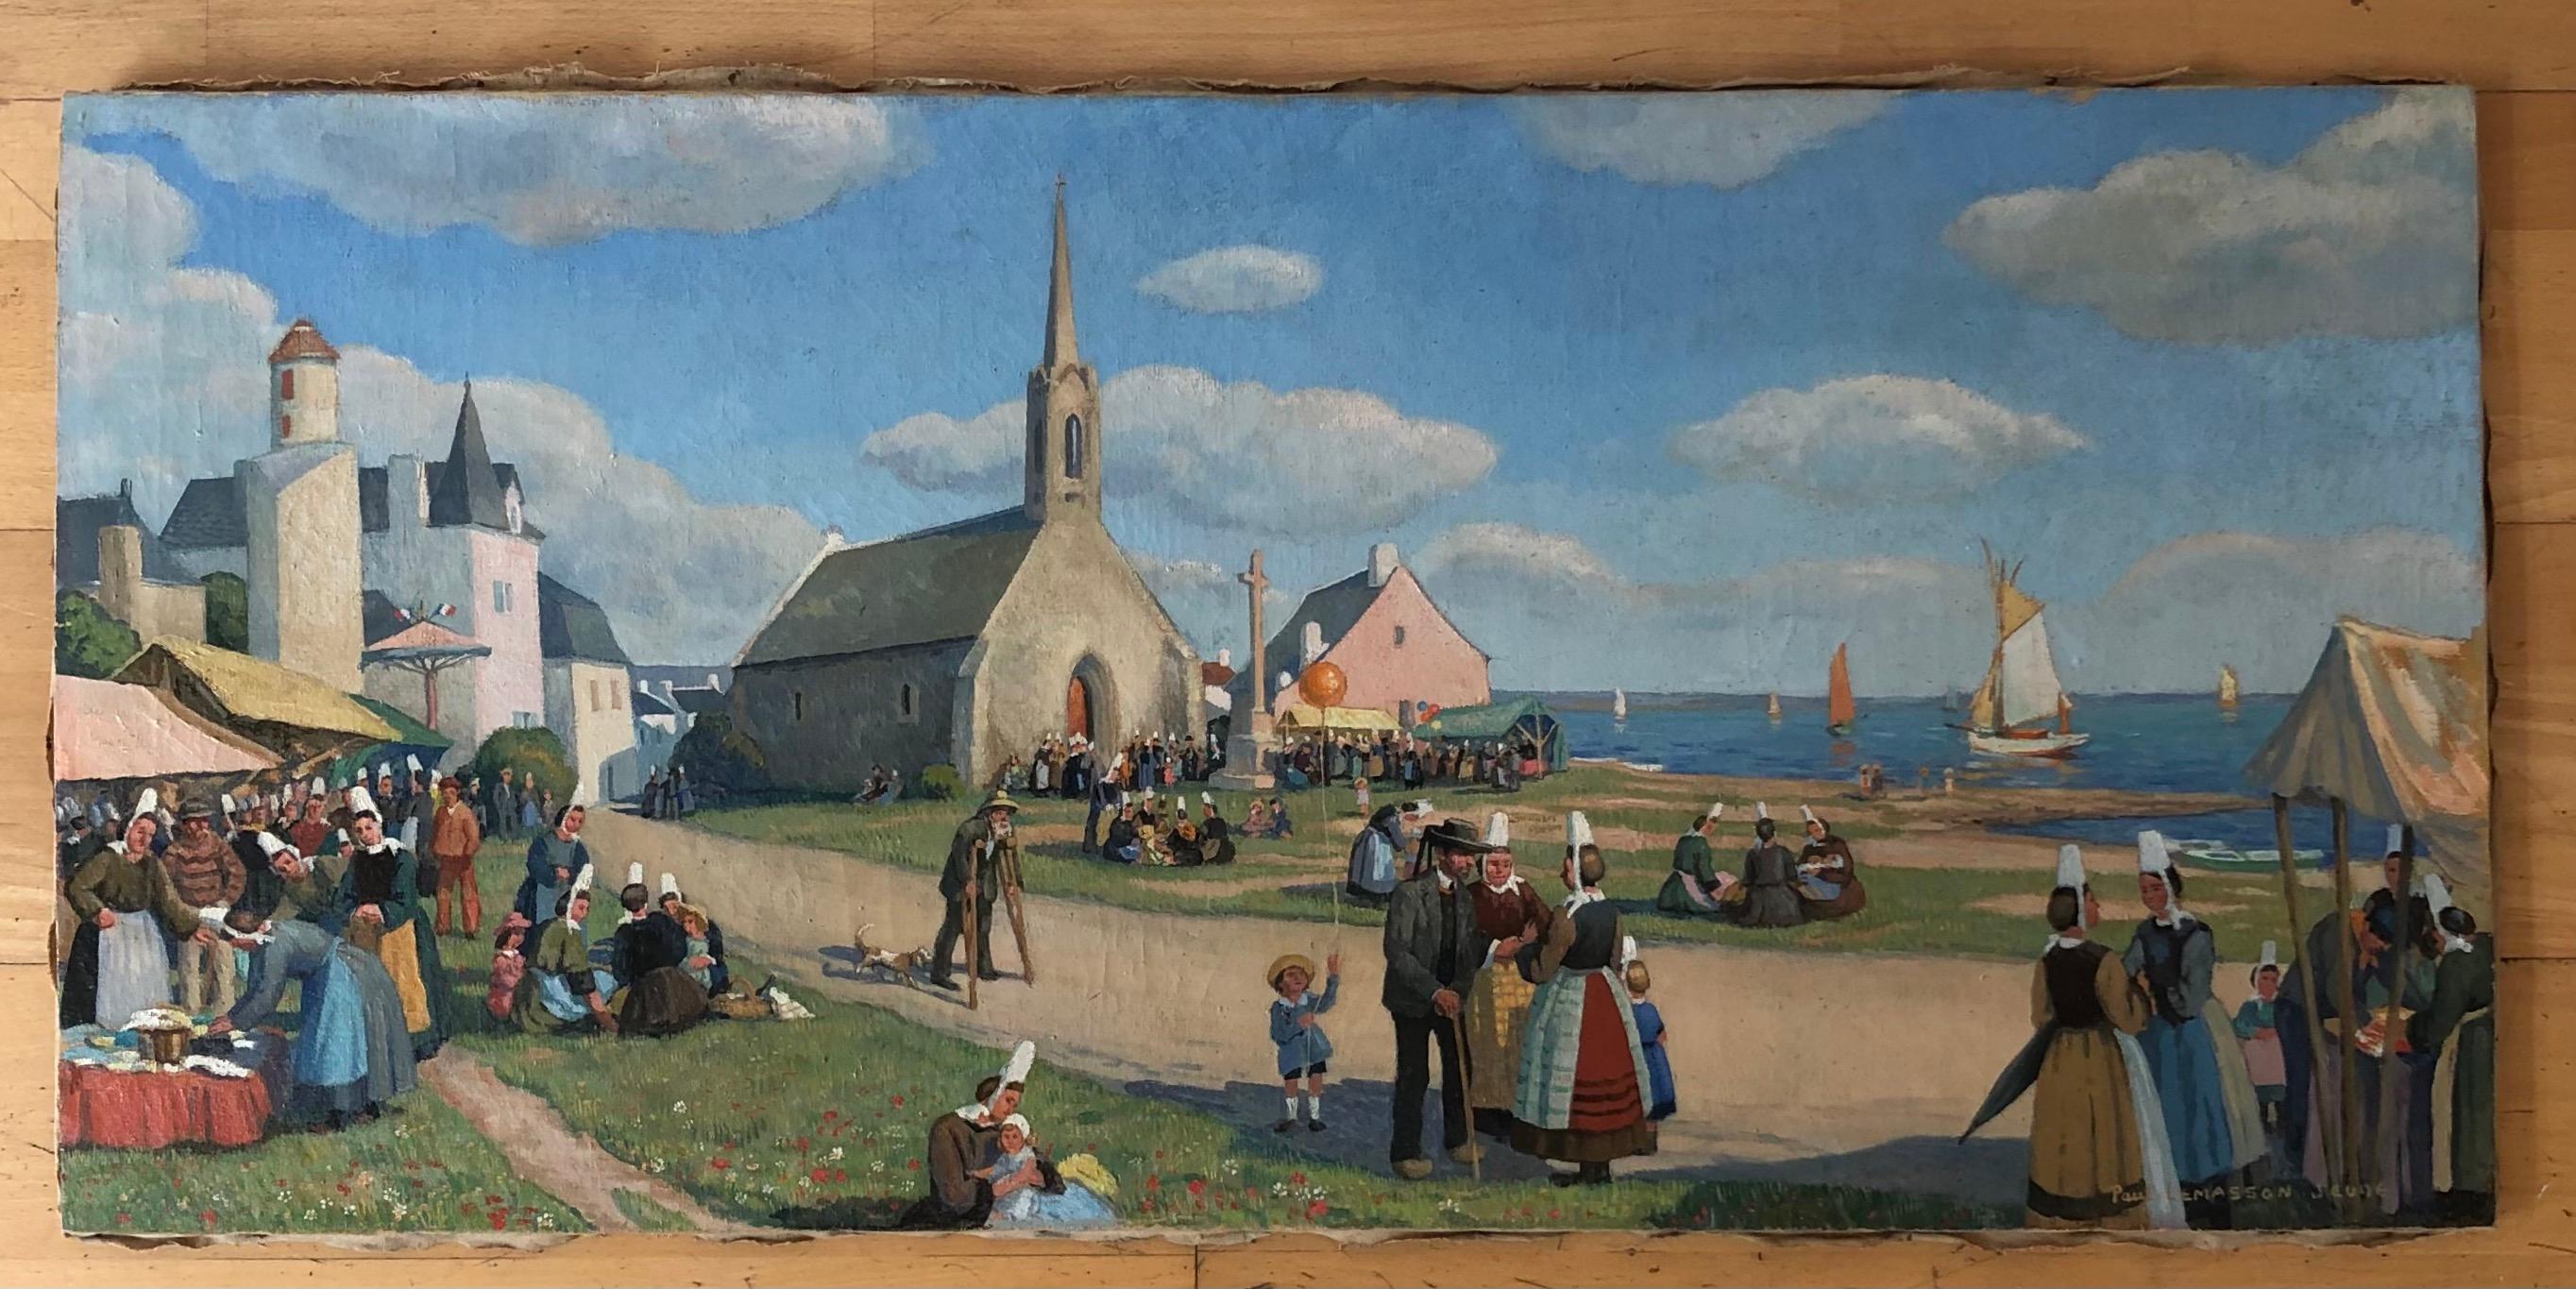 Market on the church square, Brittany - Painting by Paul Lemasson